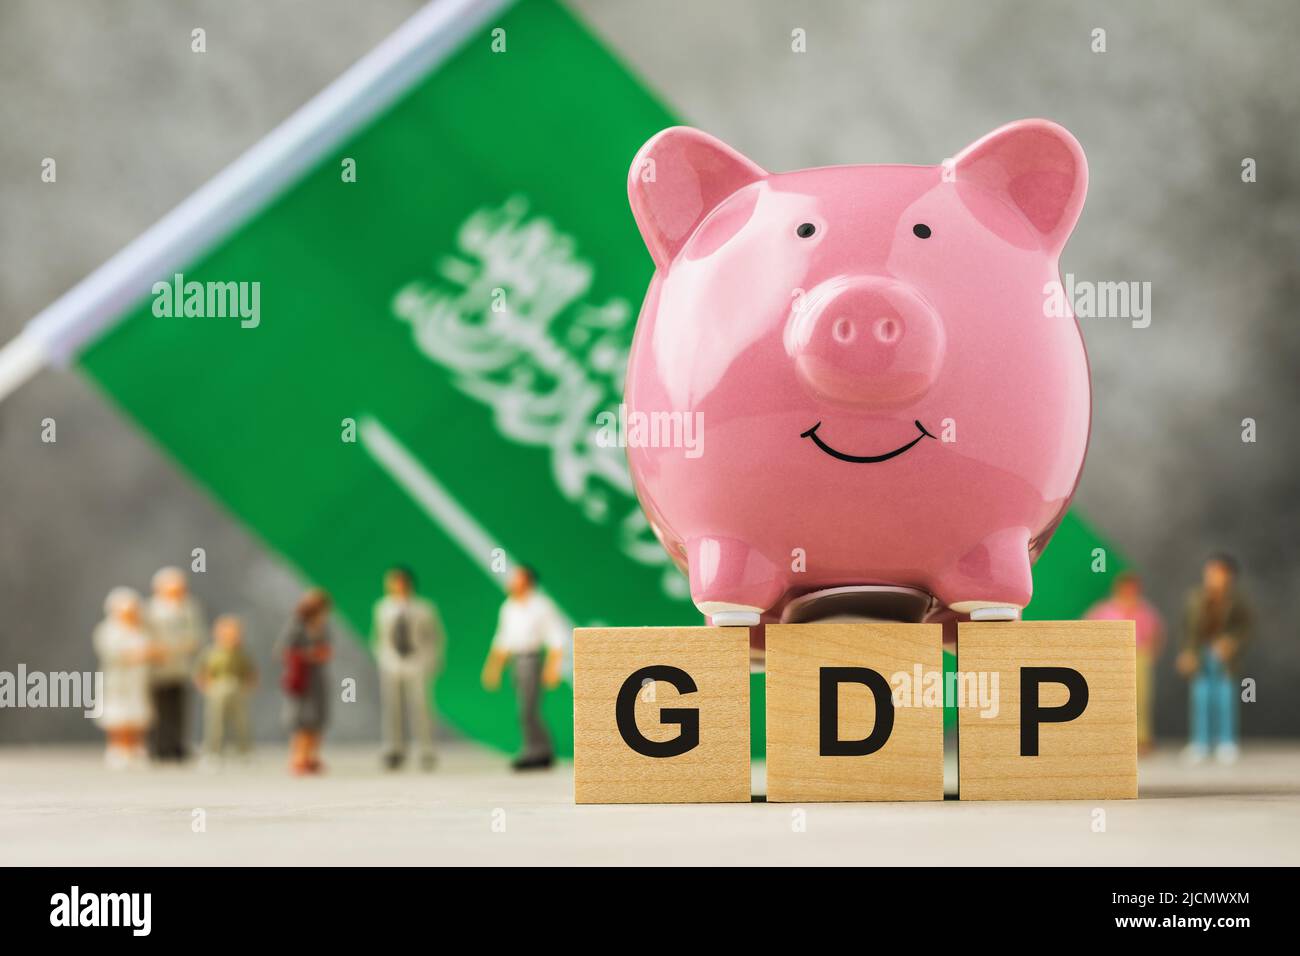 Piggy bank, wooden cubes with text, toy people made of plastic and a flag on an abstract background, a concept on the theme of the GDP of Saudi Arabia Stock Photo